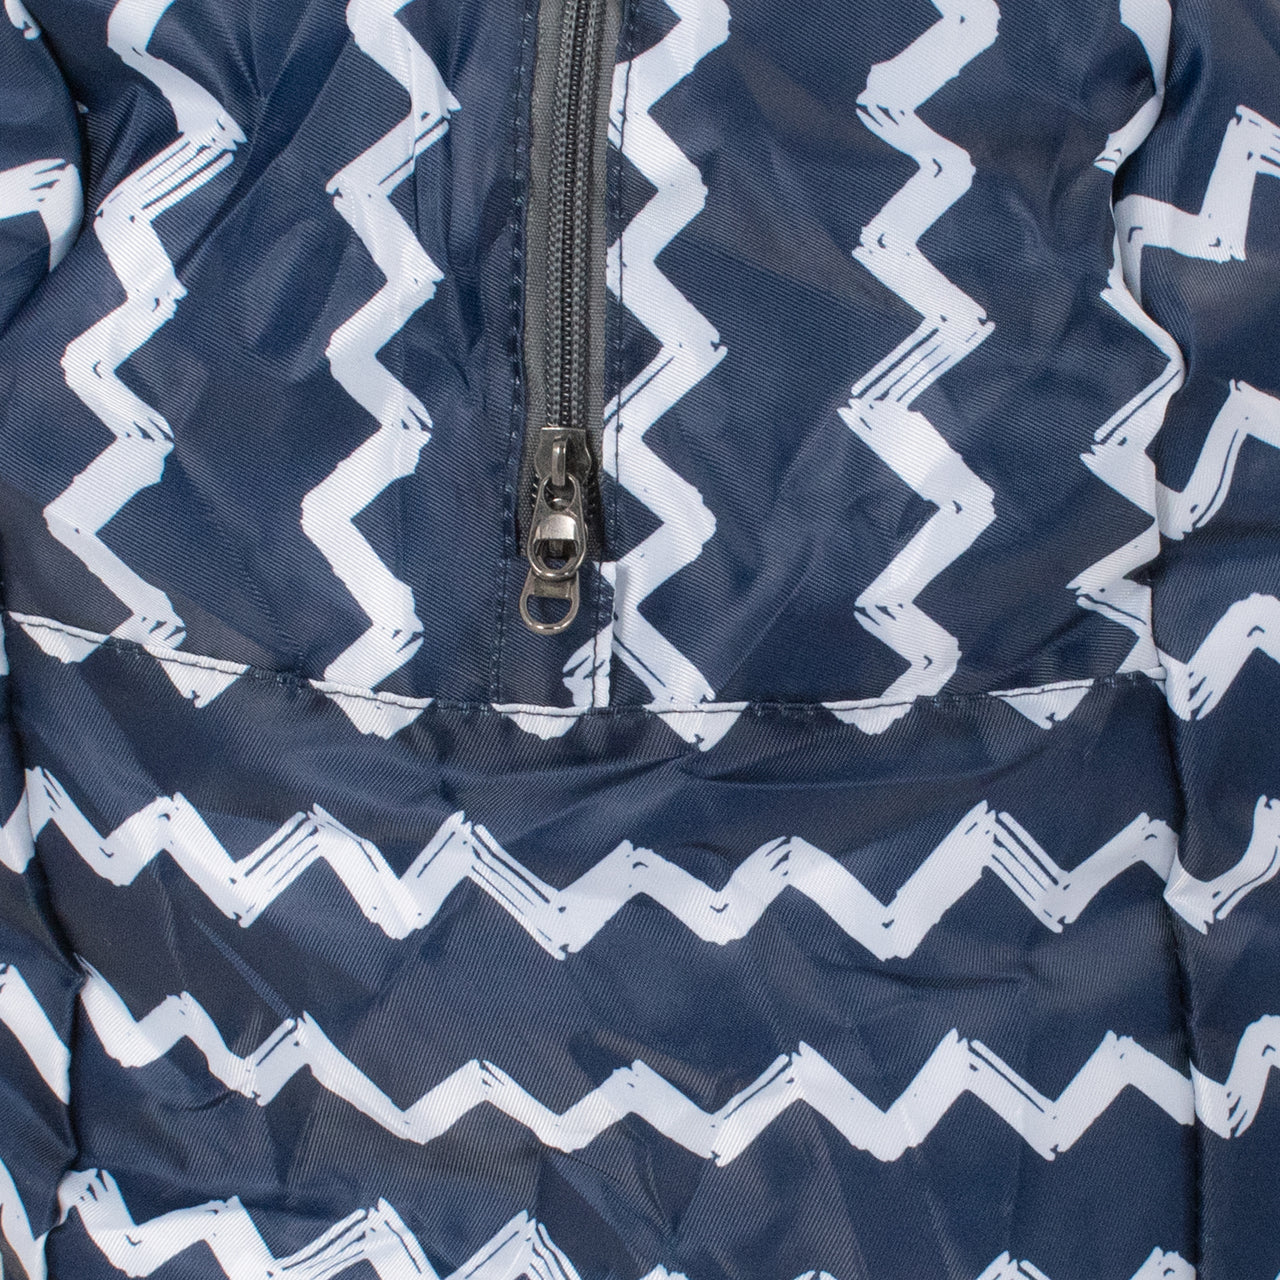 Close-up of pattern and zipper for the TrailGear 30 Liter Duffel Bag.